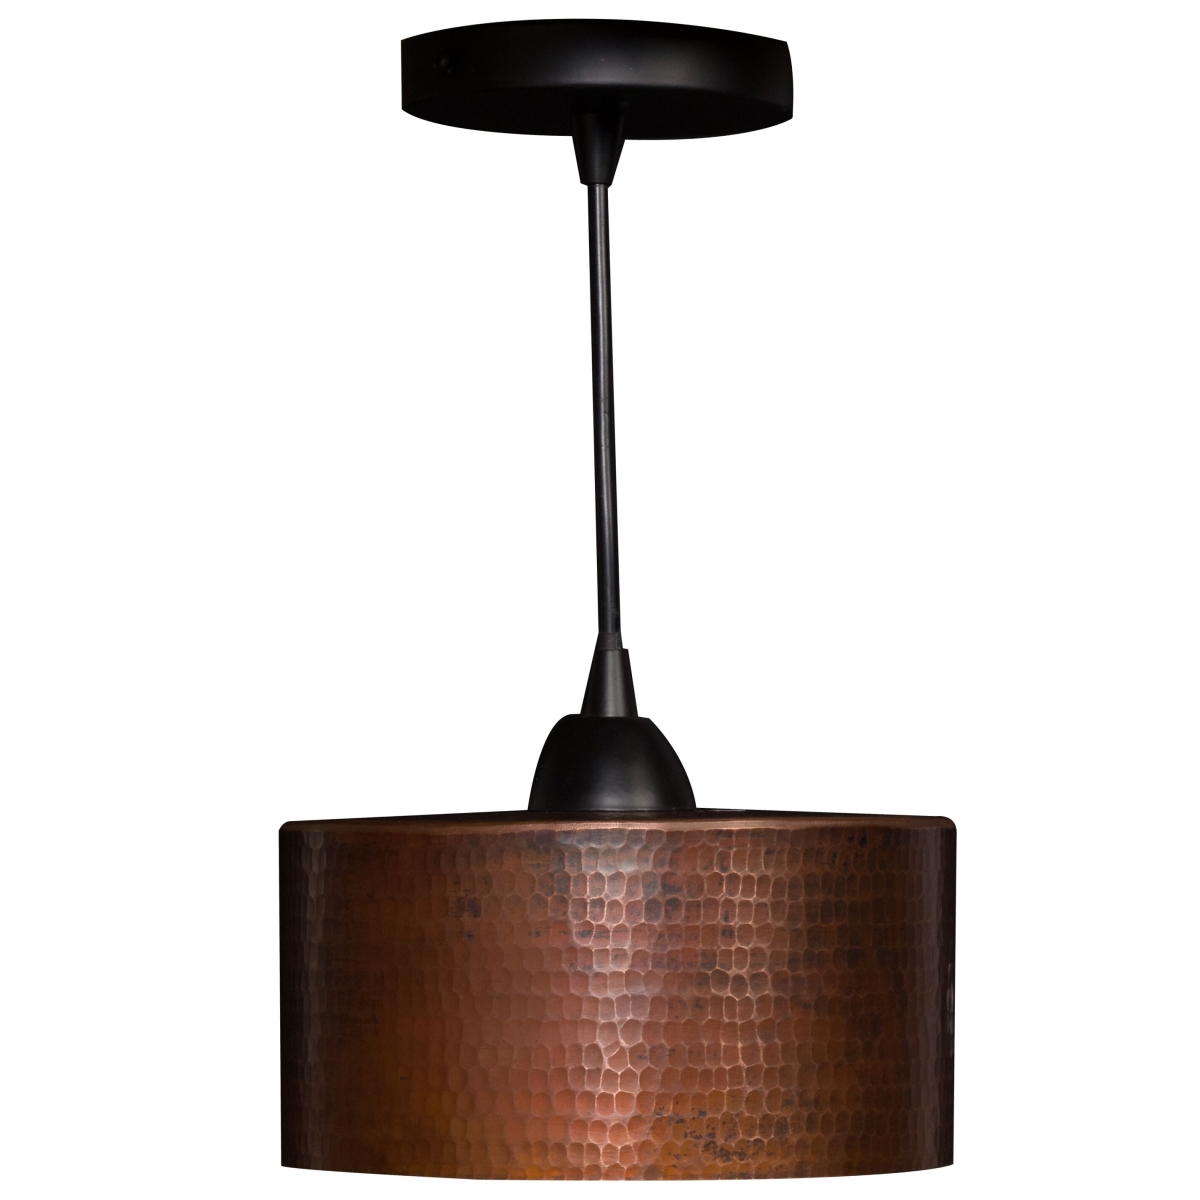 L900db 8 In. Hand Hammered Copper Round Cylinder Pendant Light - Oil Rubbed Bronze